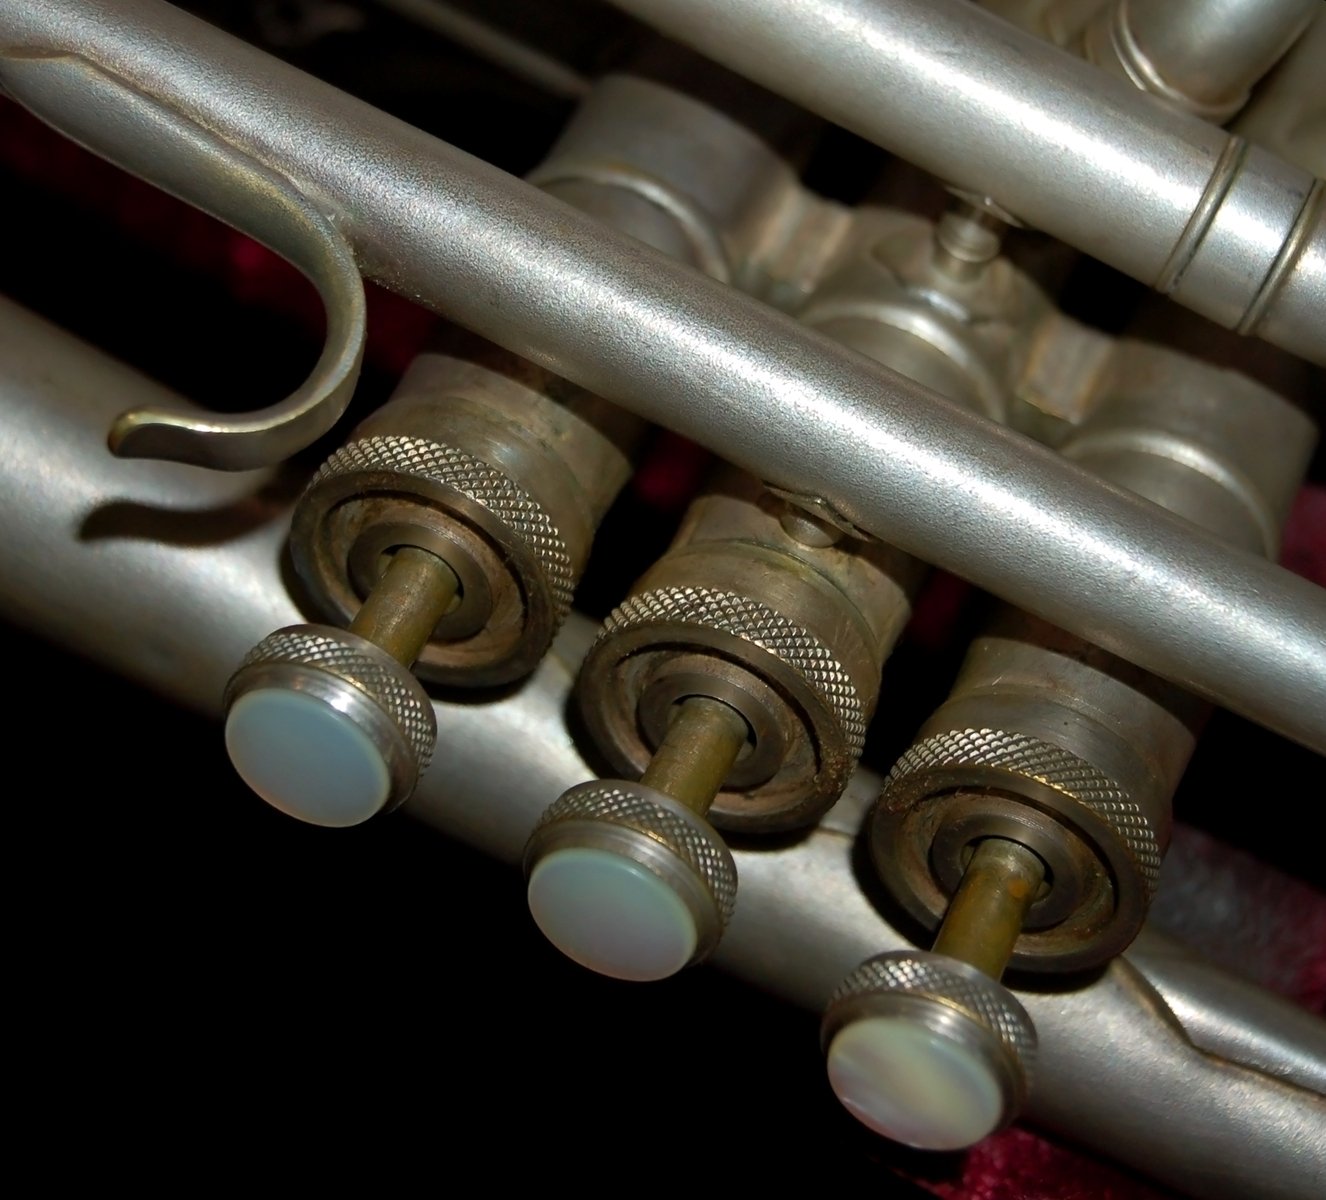 three ss valves in the center of the trumpet